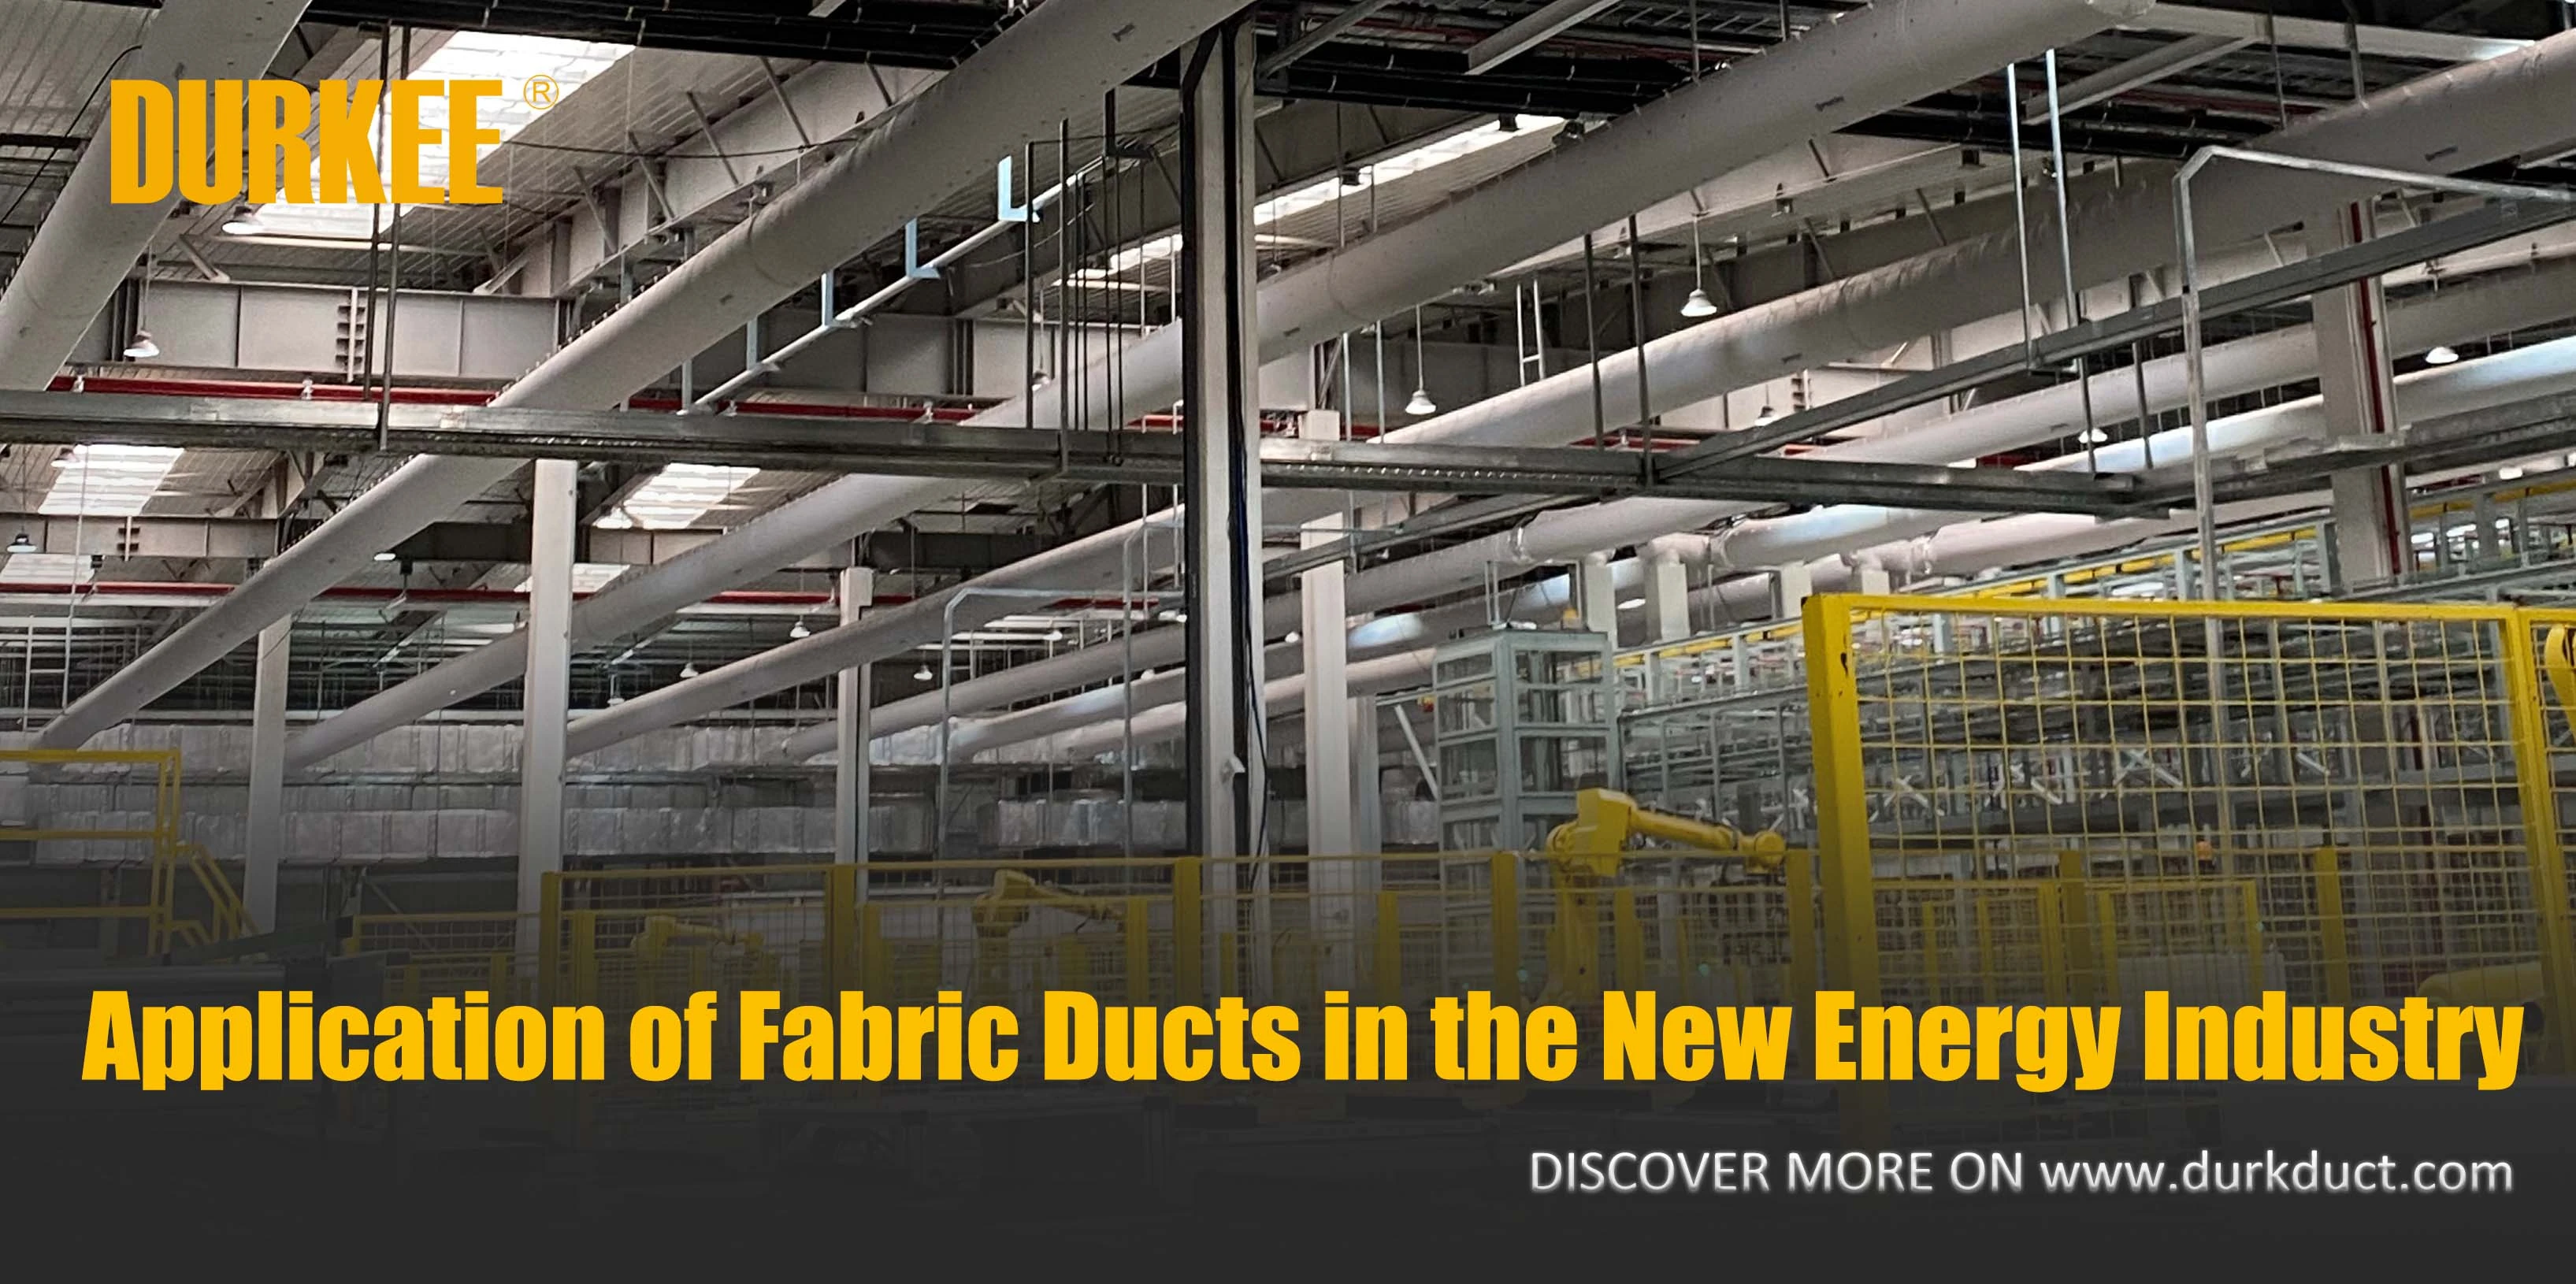 Durkduct Fabric Ducting: Empowering BYD's New Energy Battery and Automotive Manufacturing